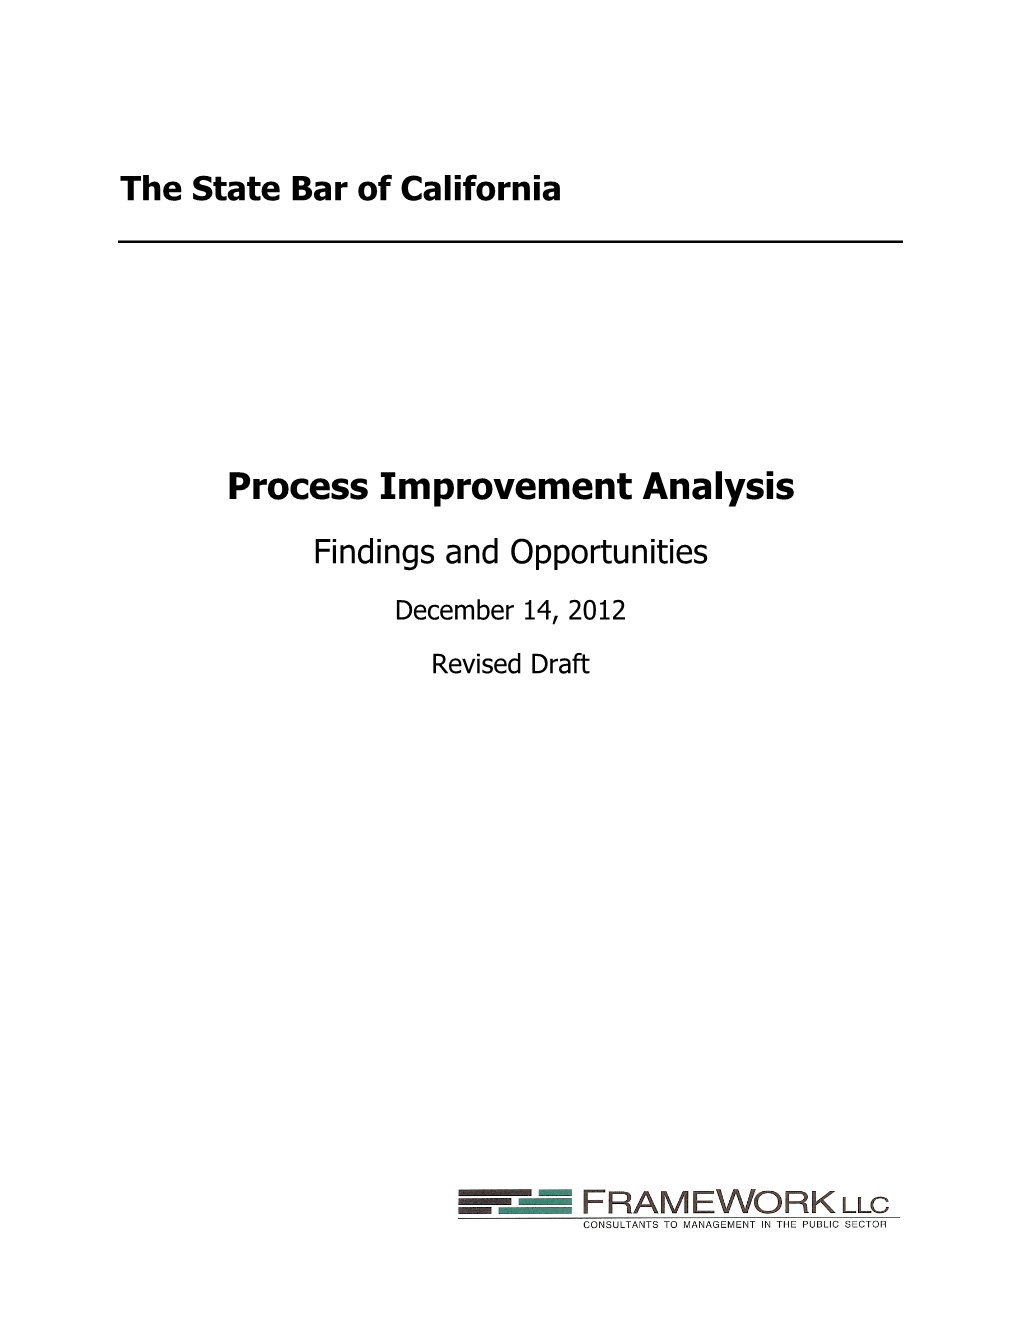 Process Improvement Analysis Findings and Opportunities